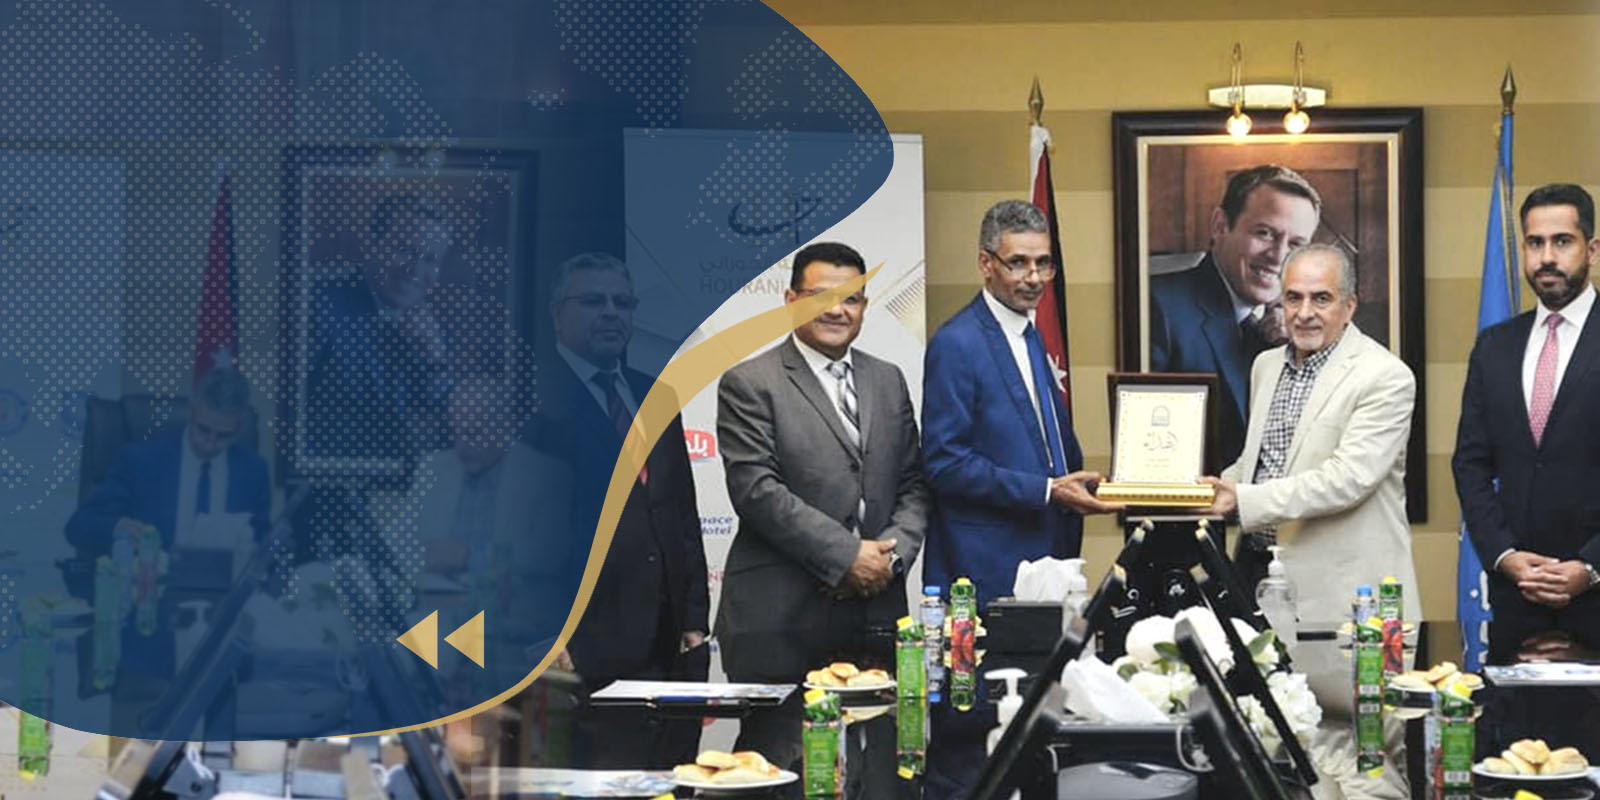 Sirte University and Amman private university have signed an agreement for mutual academic collaborations